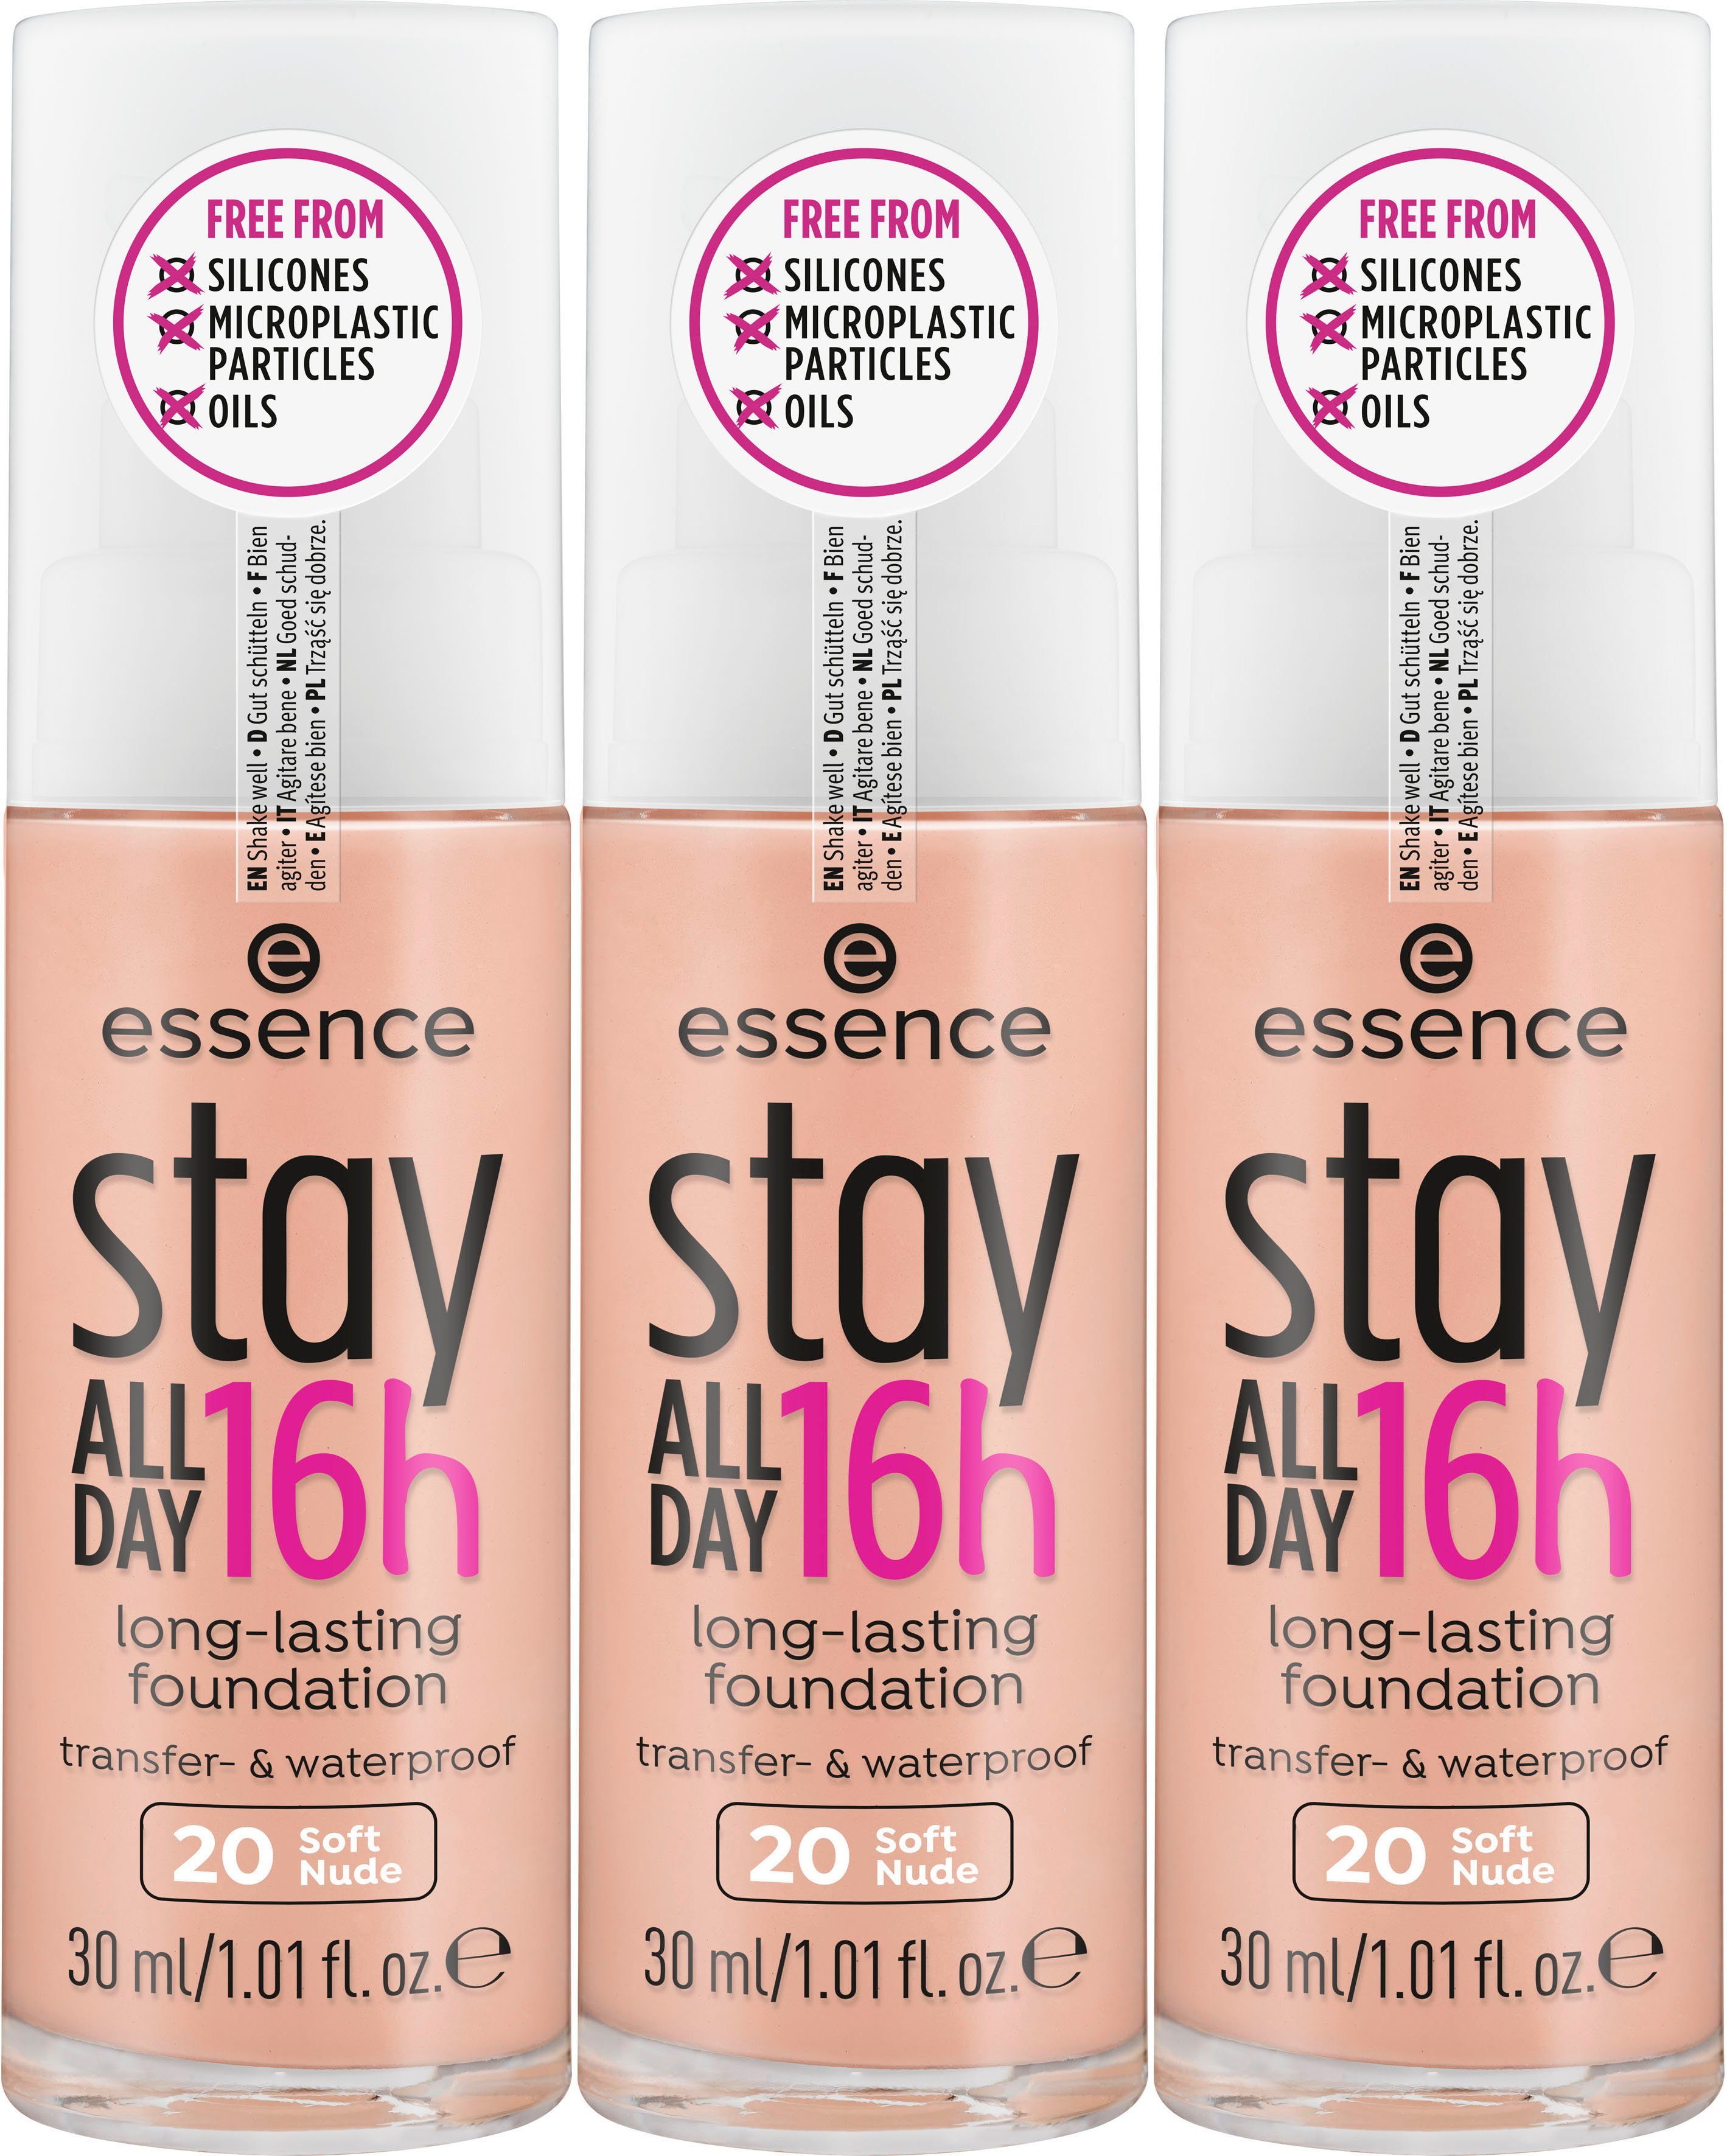 Essence Foundation stay ALL DAY long-lasting, 16h